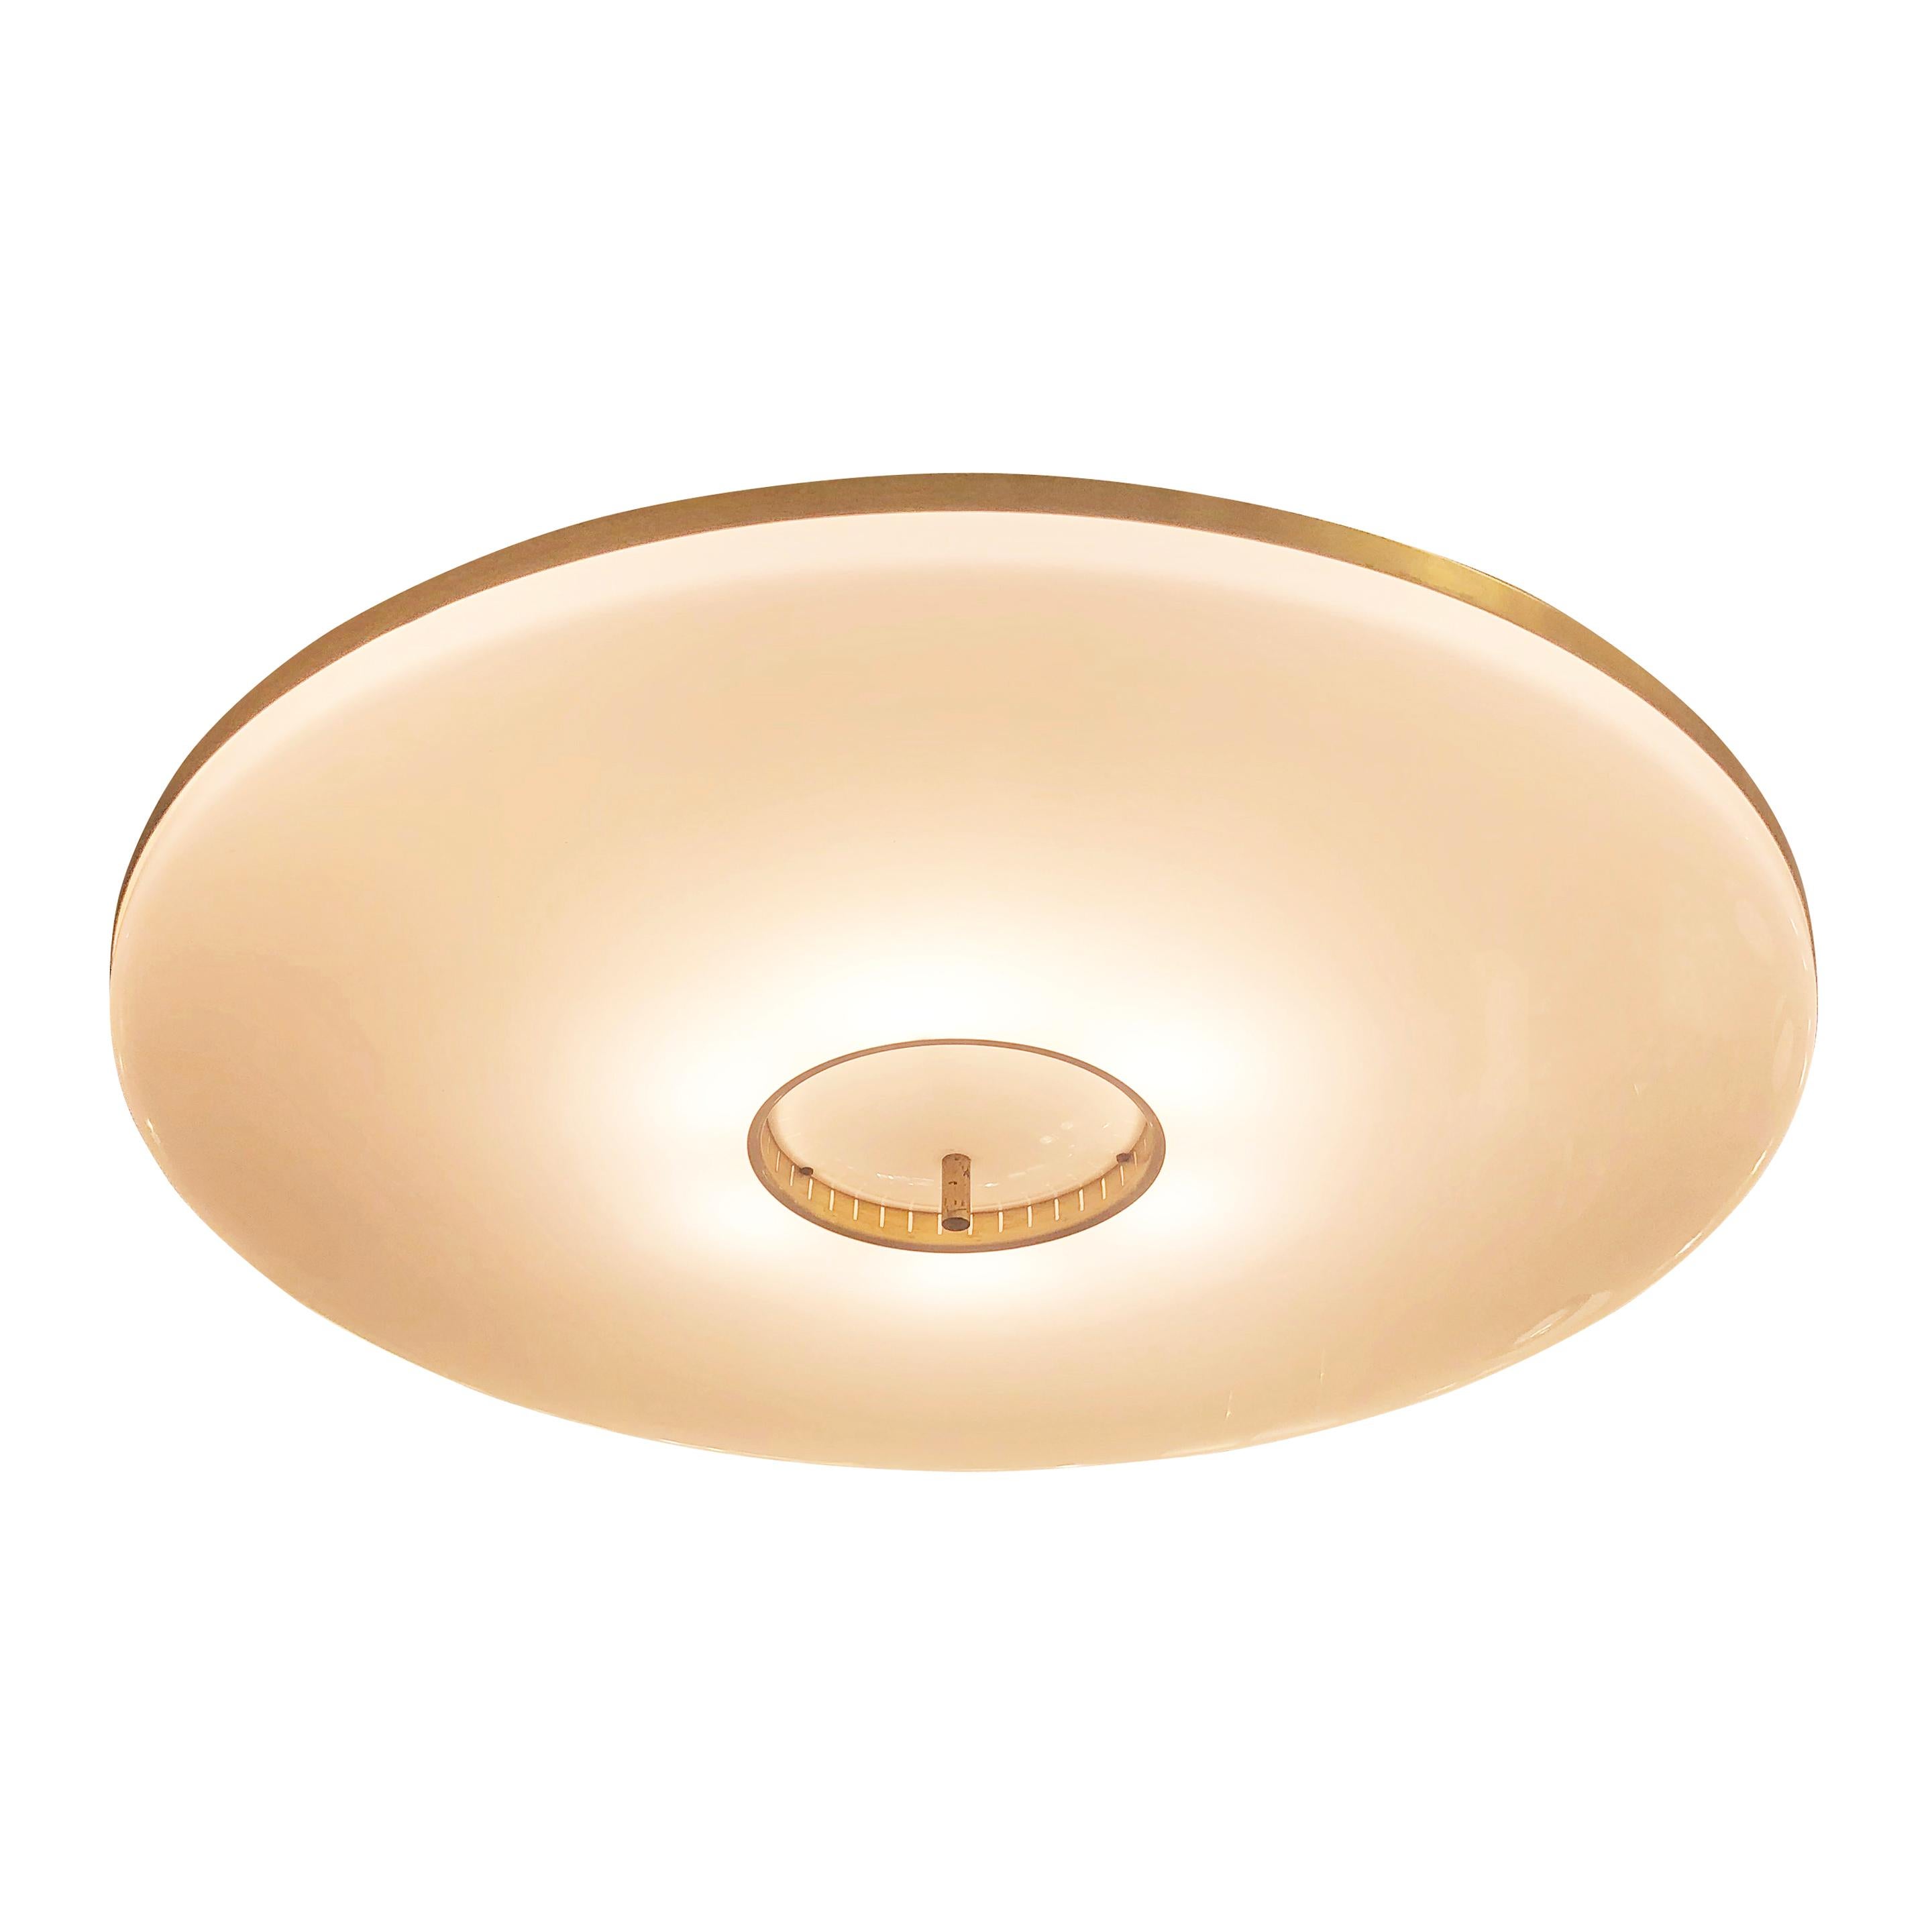 Large Italian semi-flush mount fixture from the the 1960s with a Plexiglas diffuser and a satin brass finish. 

Meaures: Diameter 26”

Height 12” (can be adjusted upon request).

  